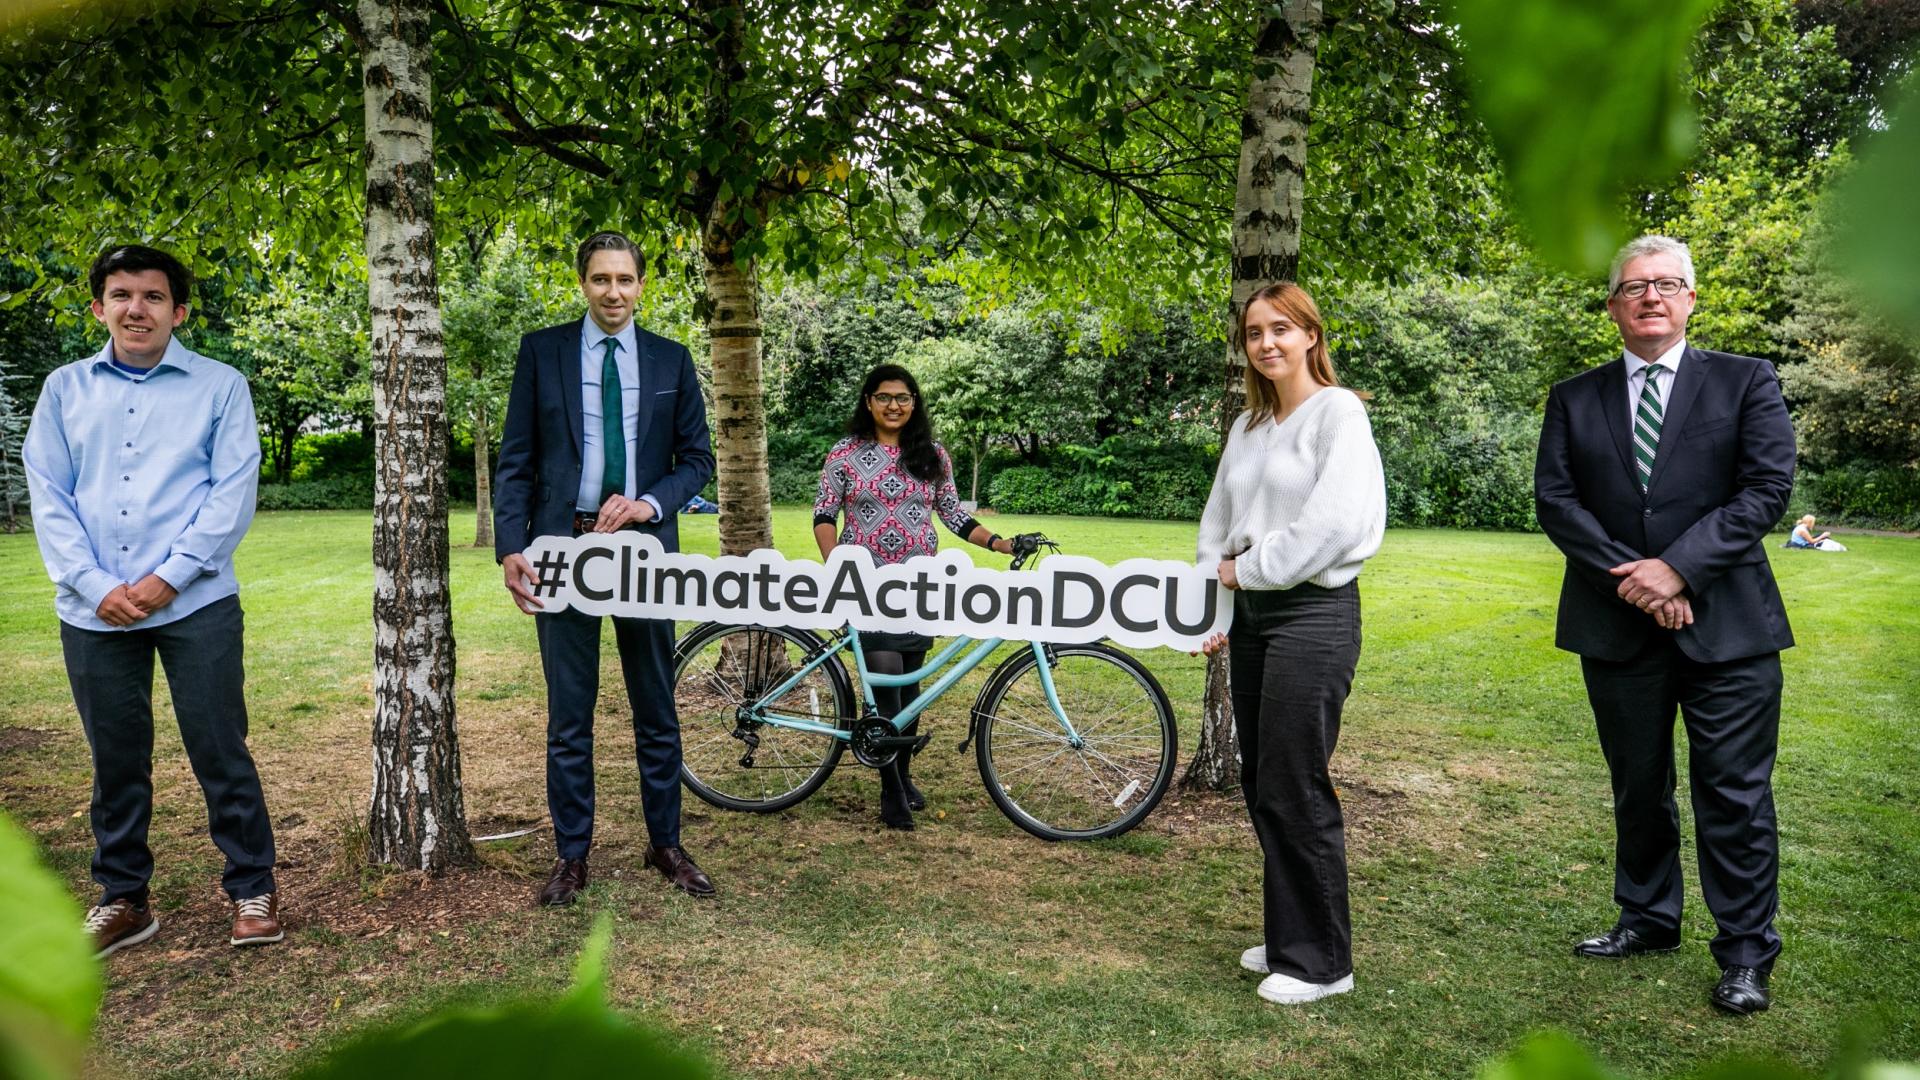 Image showing the launch of DCU's Climate Action Plan featuring Minister for Higher Education Simon Harris and DCU President Professor Daire Keogh